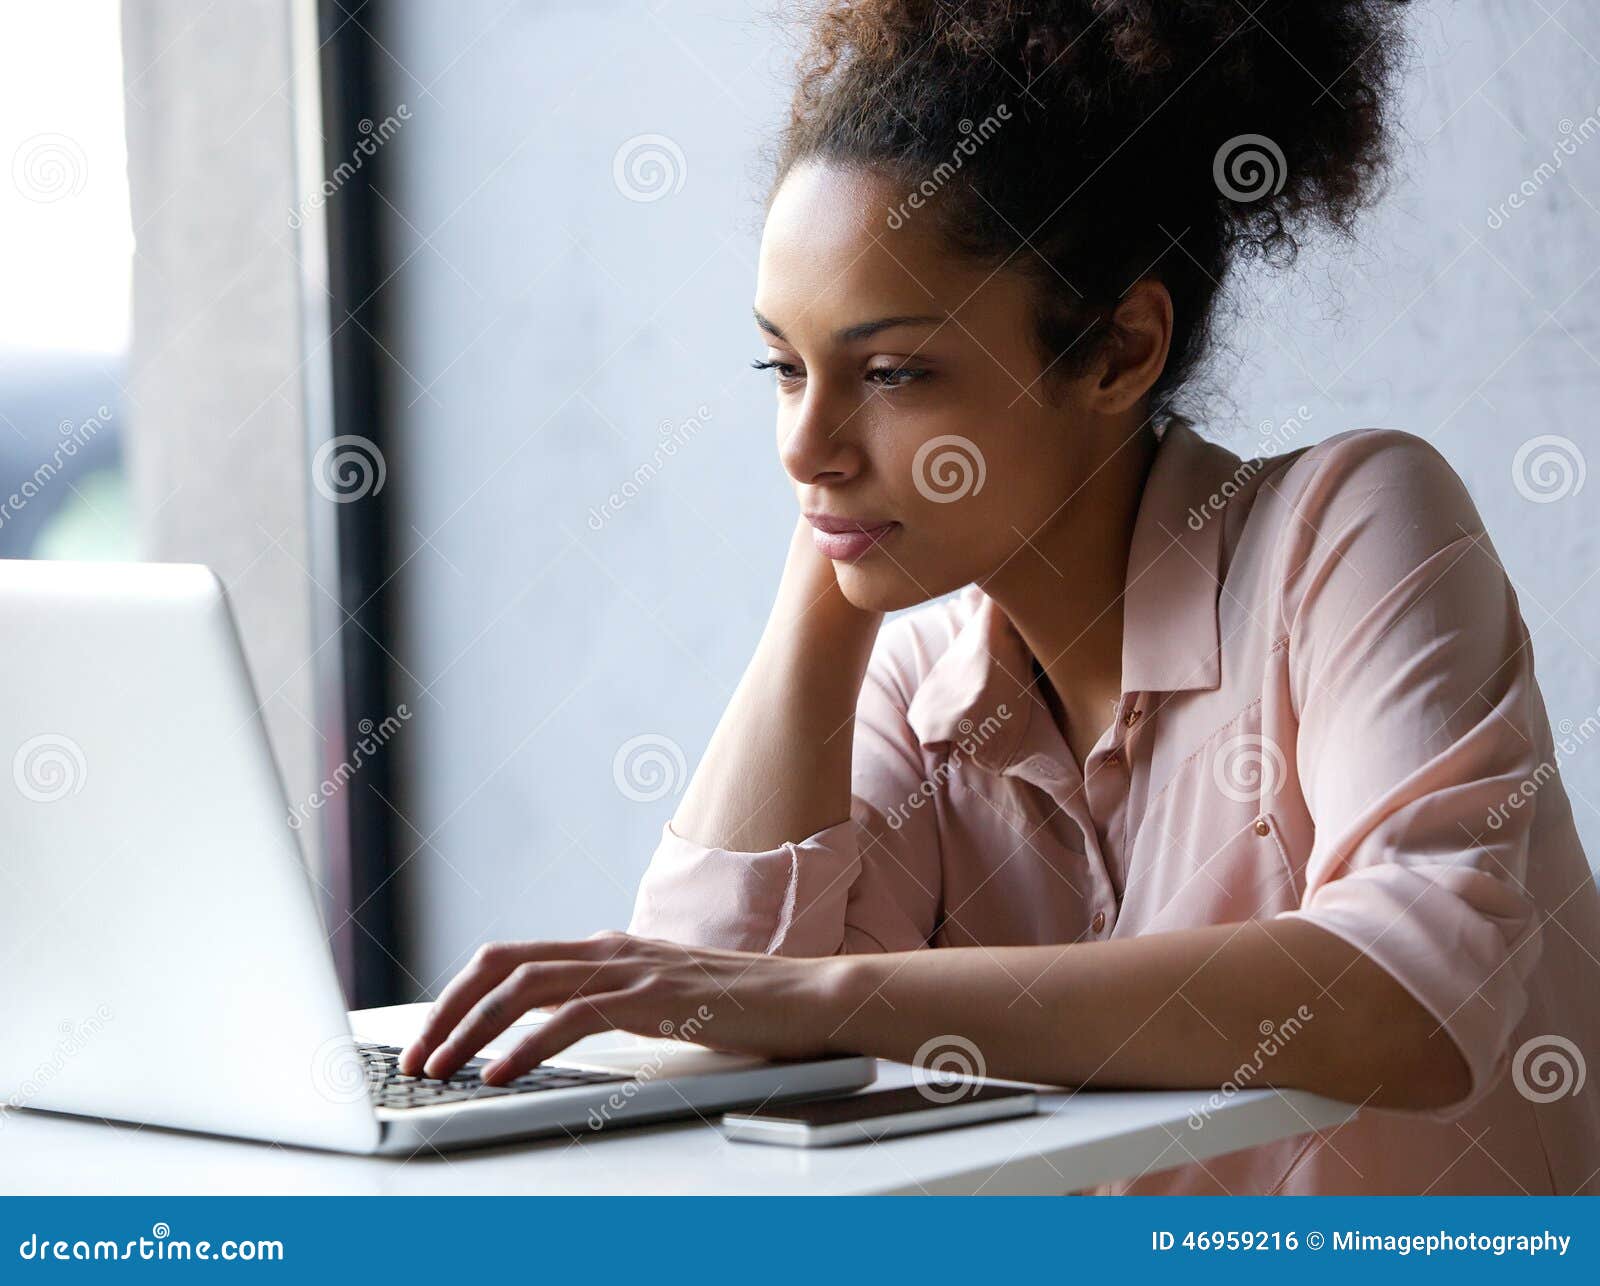 young black woman looking at laptop